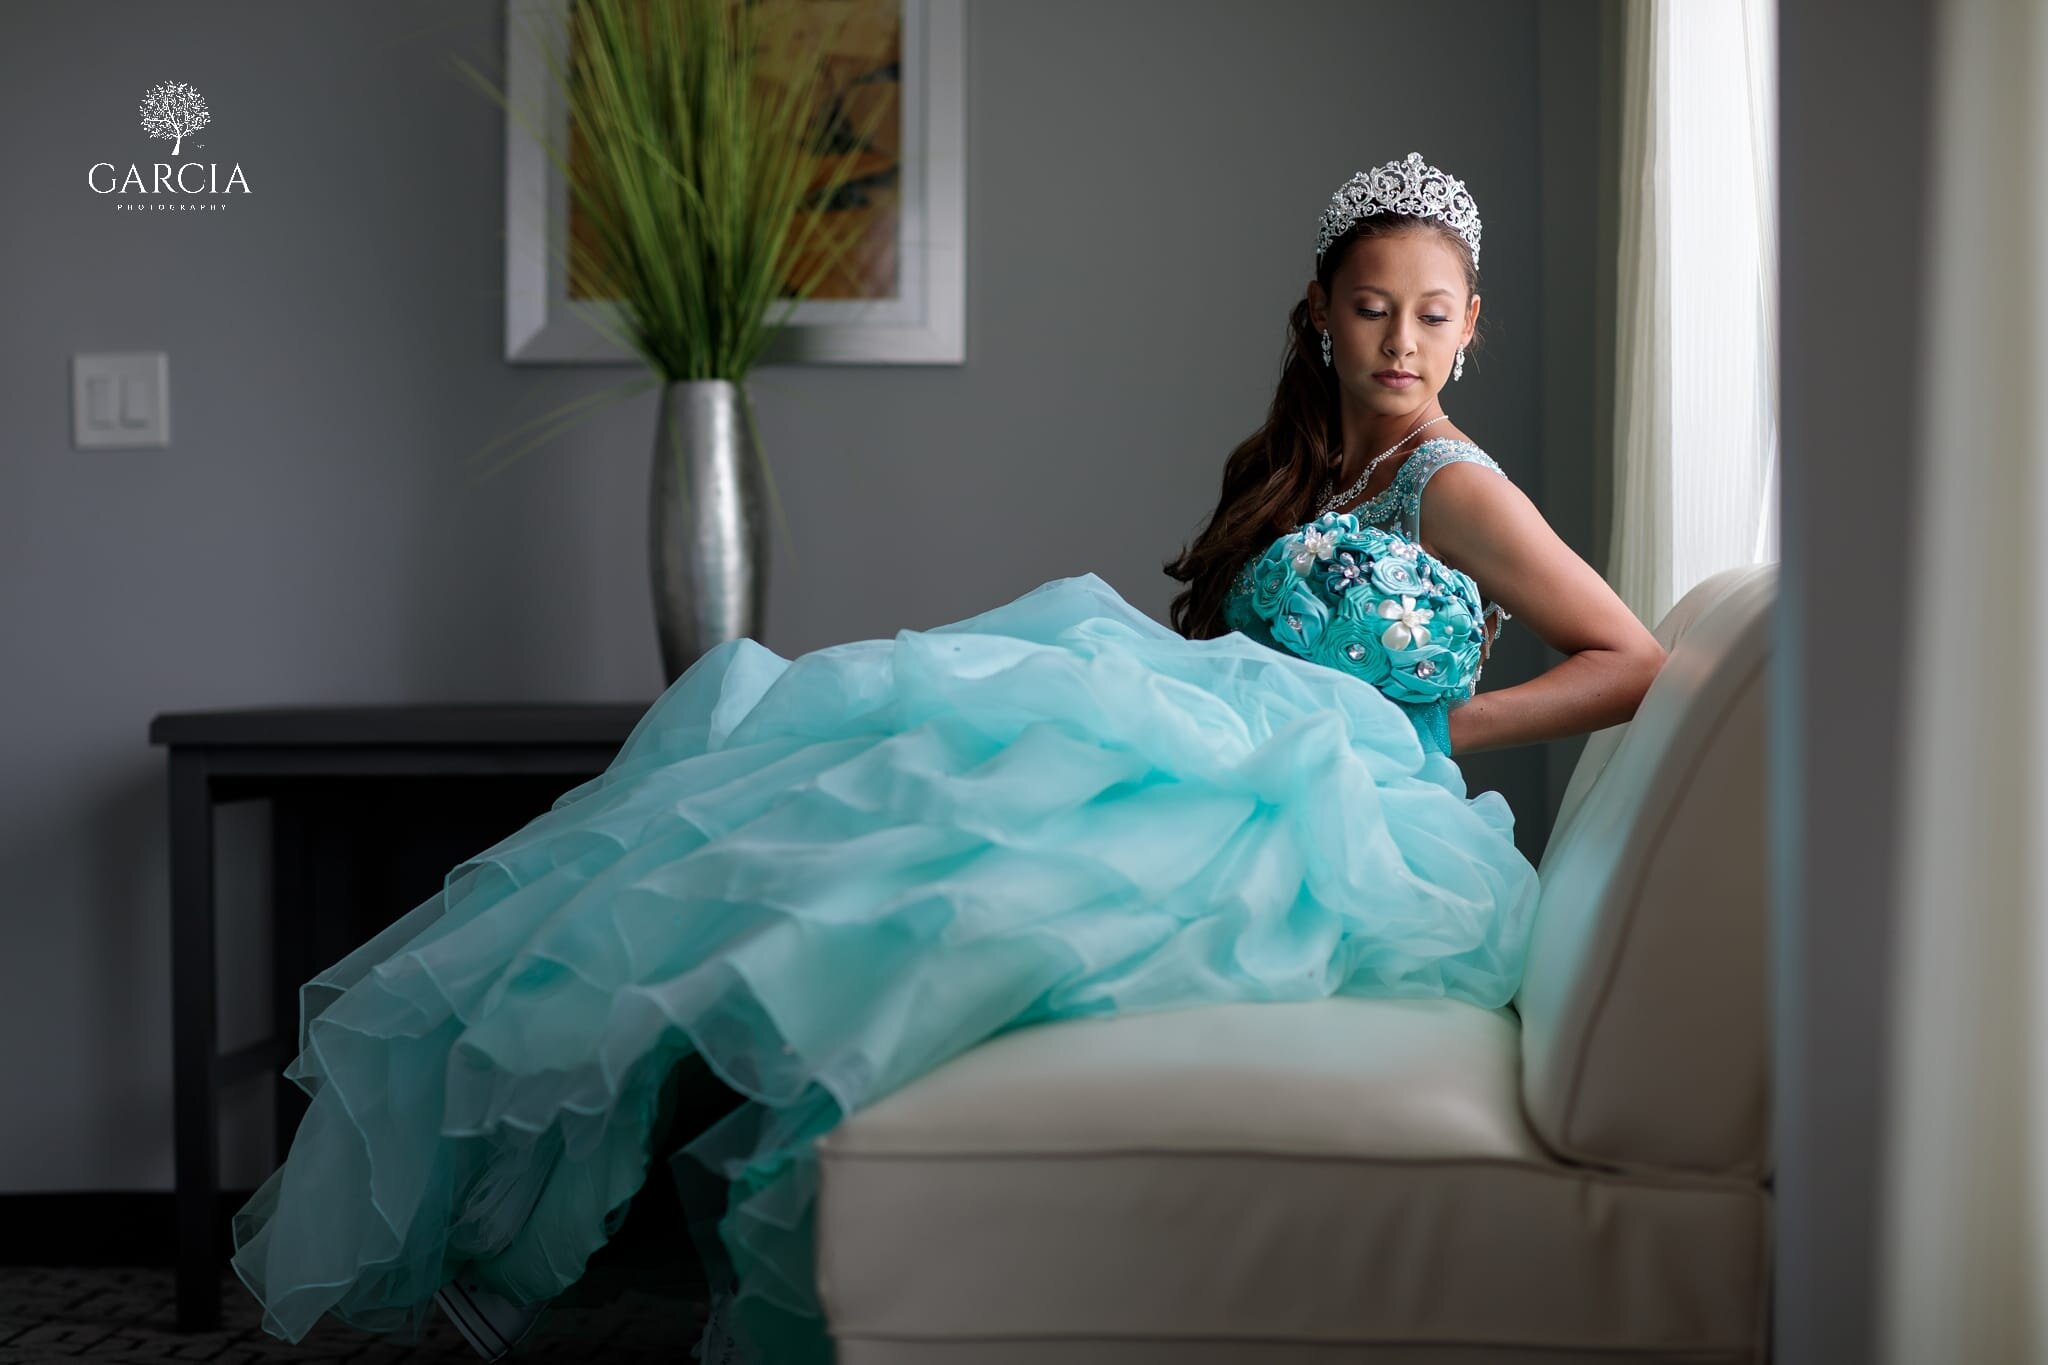 Taylor-Quince-Garcia-Photography-9842.jpg